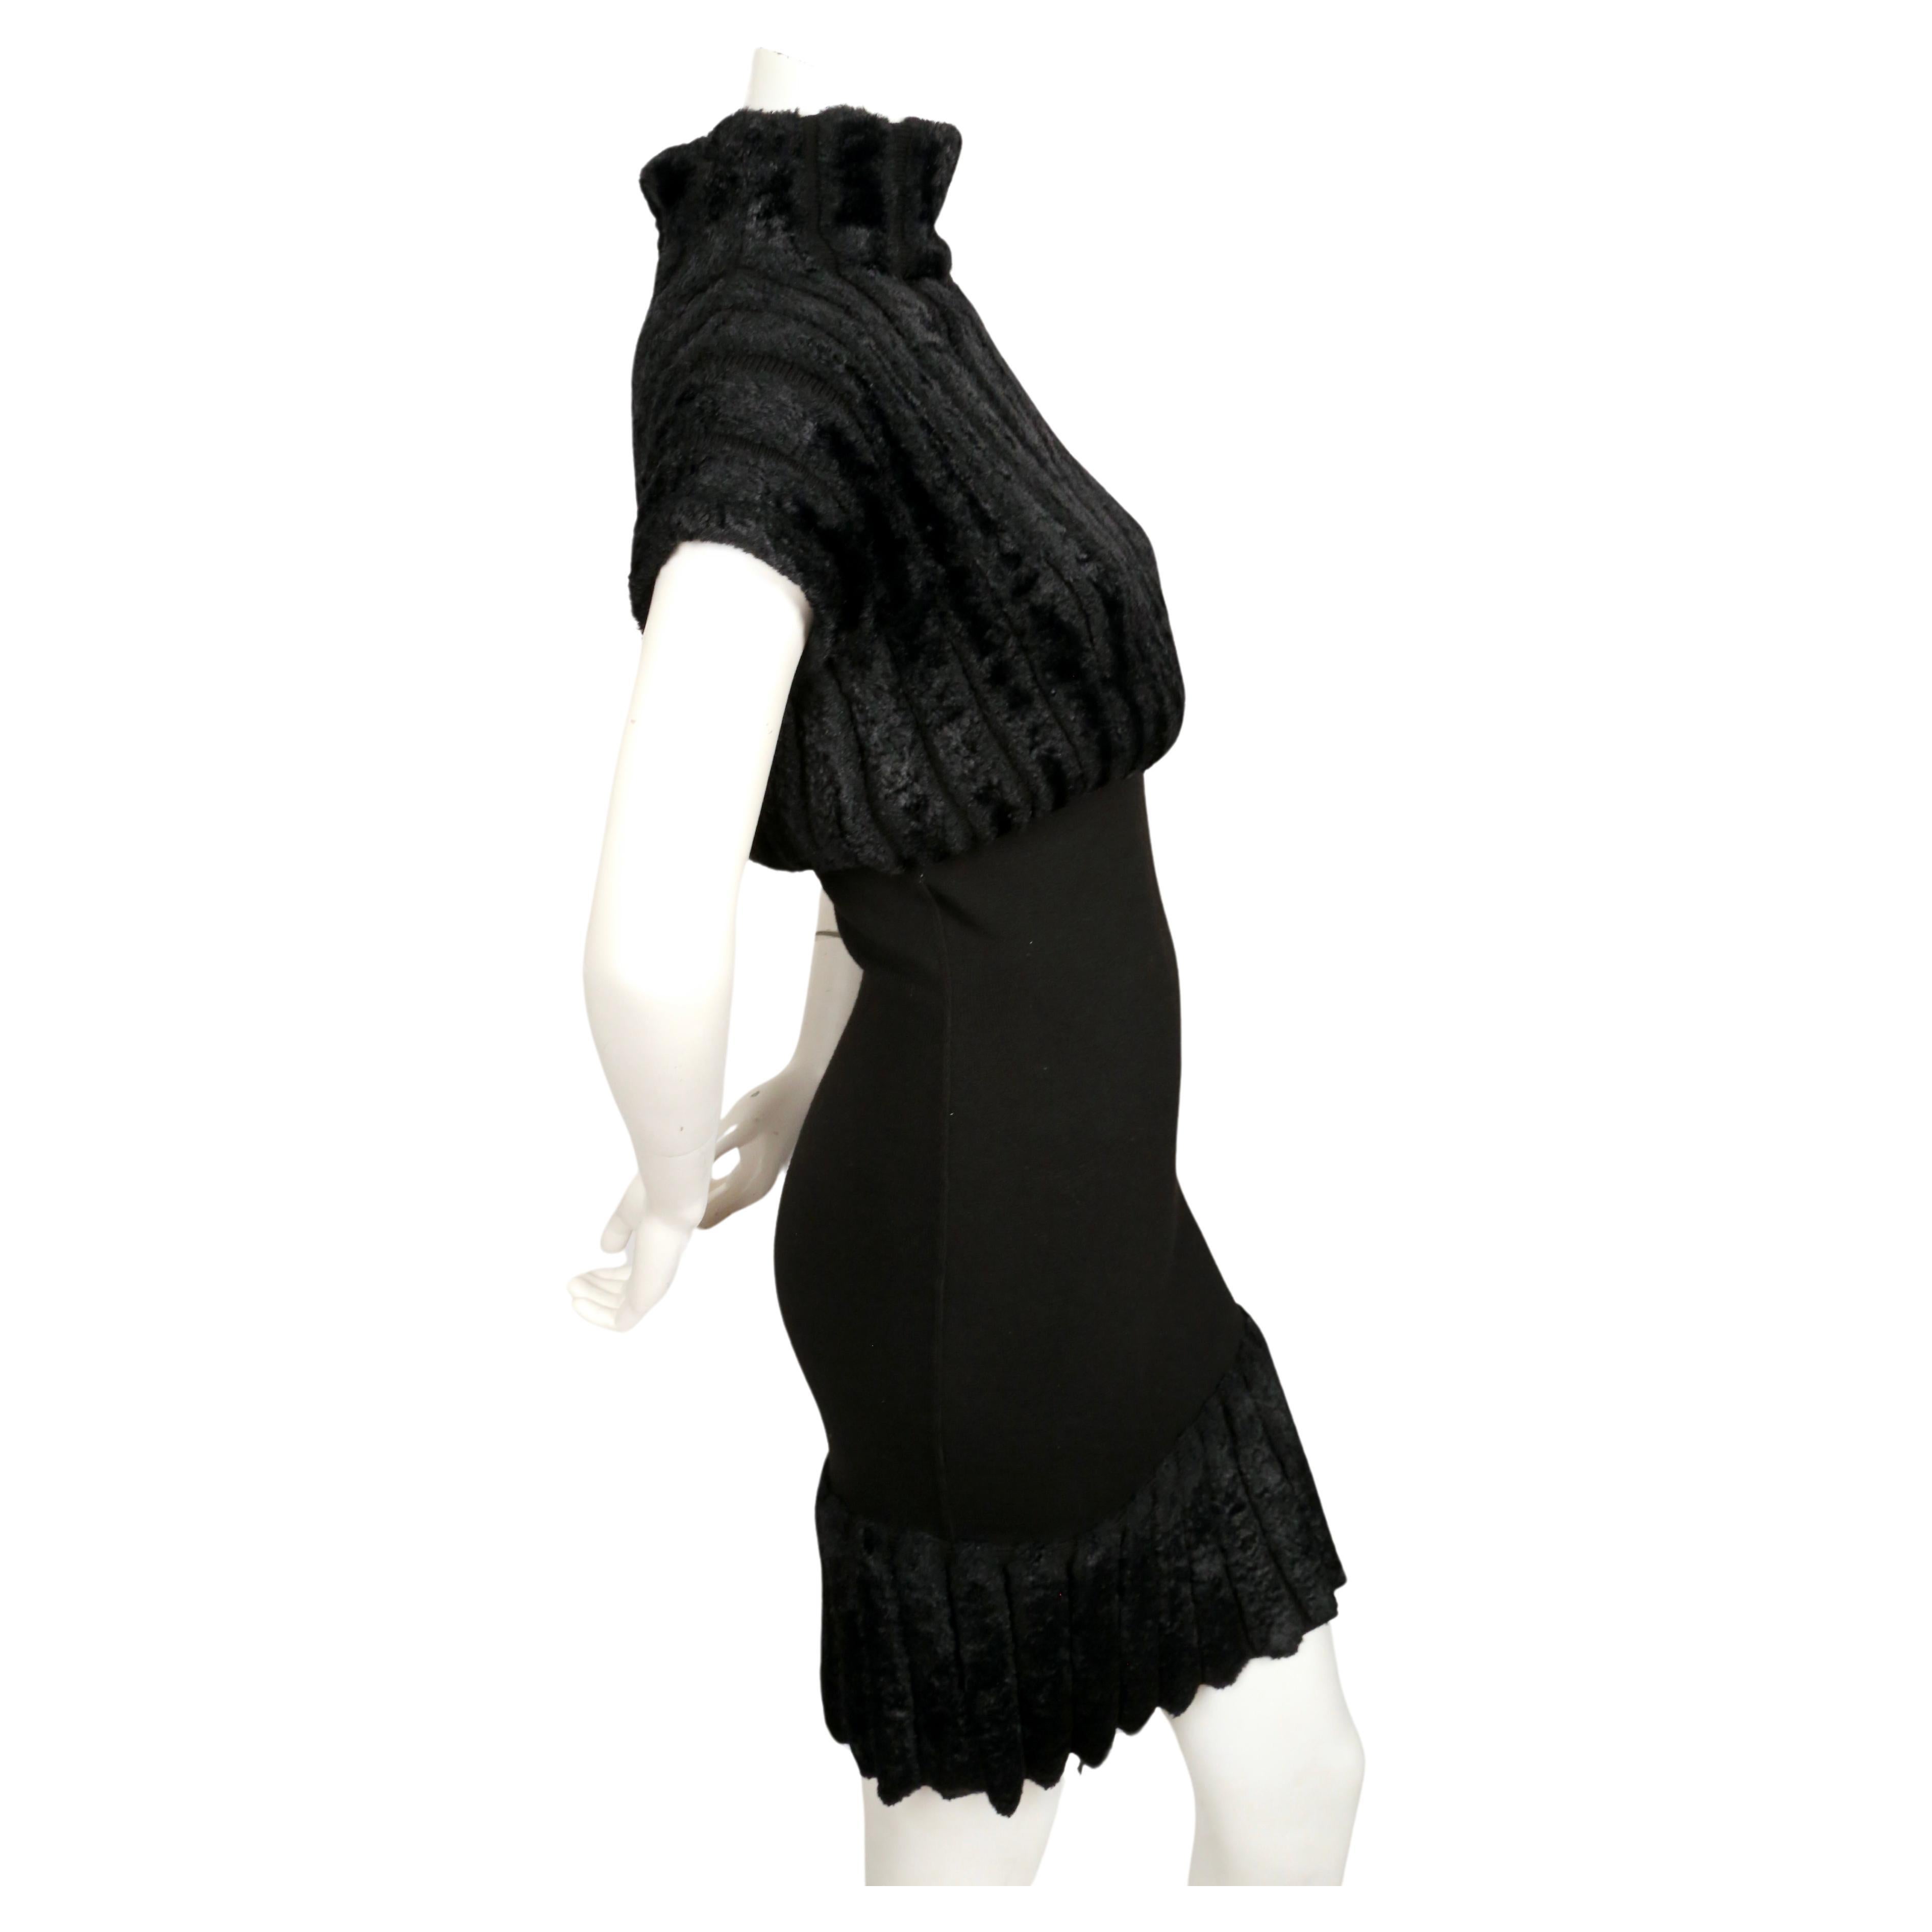 Very rare, jet-black, ribbed chenille dress from Azzedine Alaia dating to 1991. Labeled a size S. Approximate measurements (unstretched): bust 32